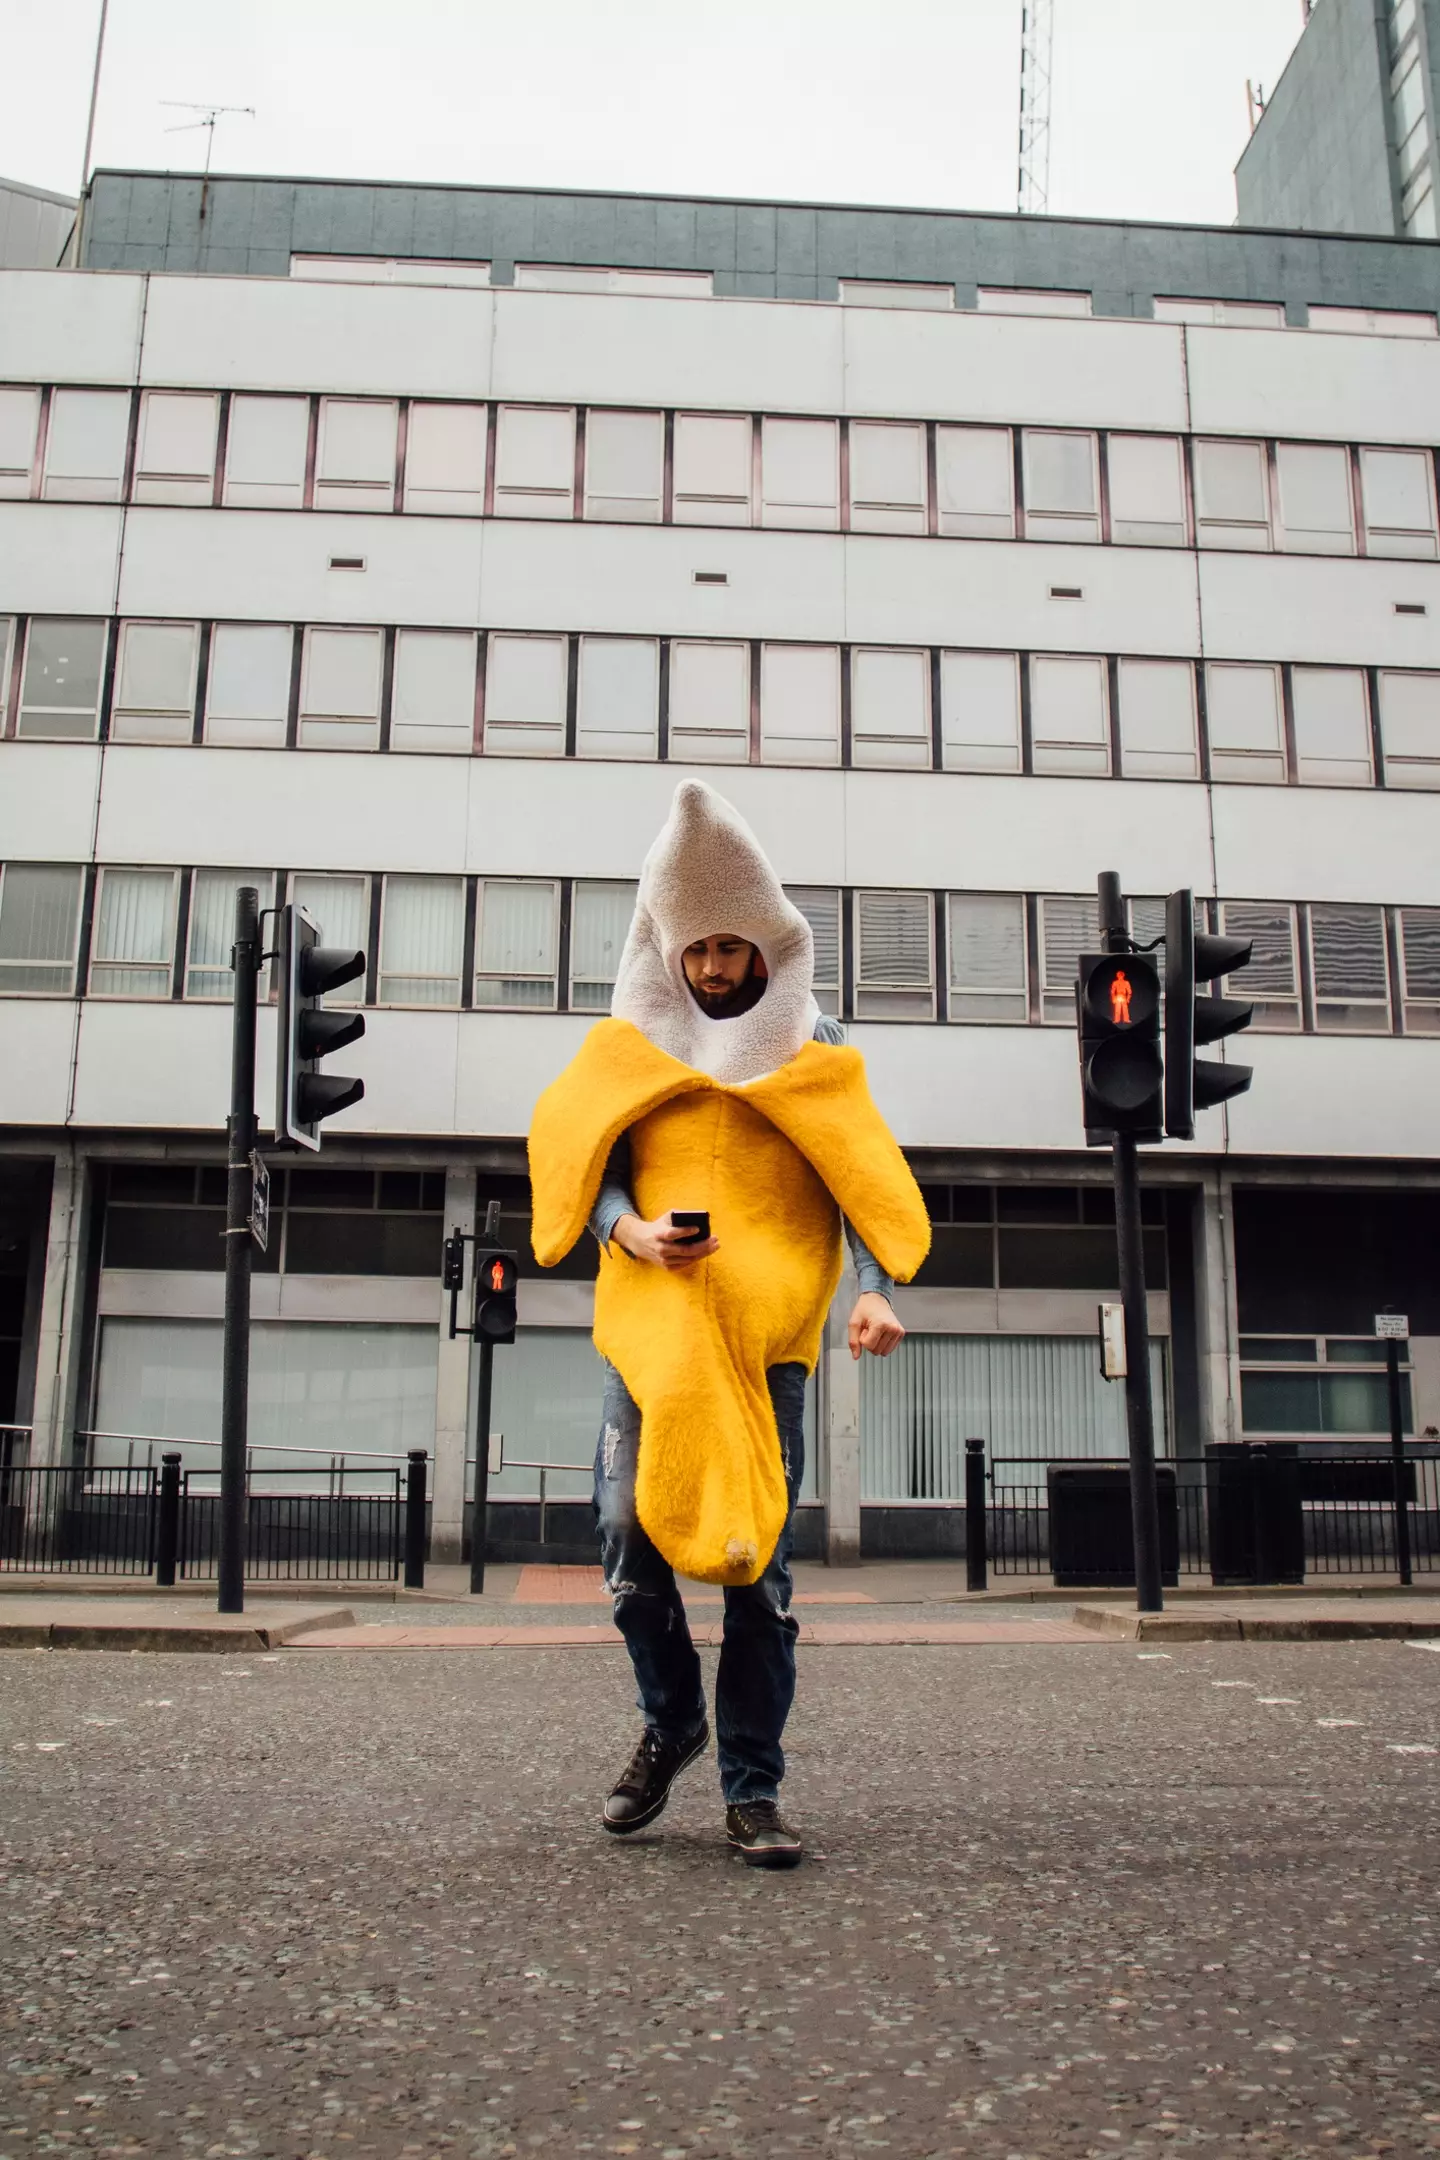 Prague could be saying goodbye to stags dressed as bananas (Getty Stock Images)